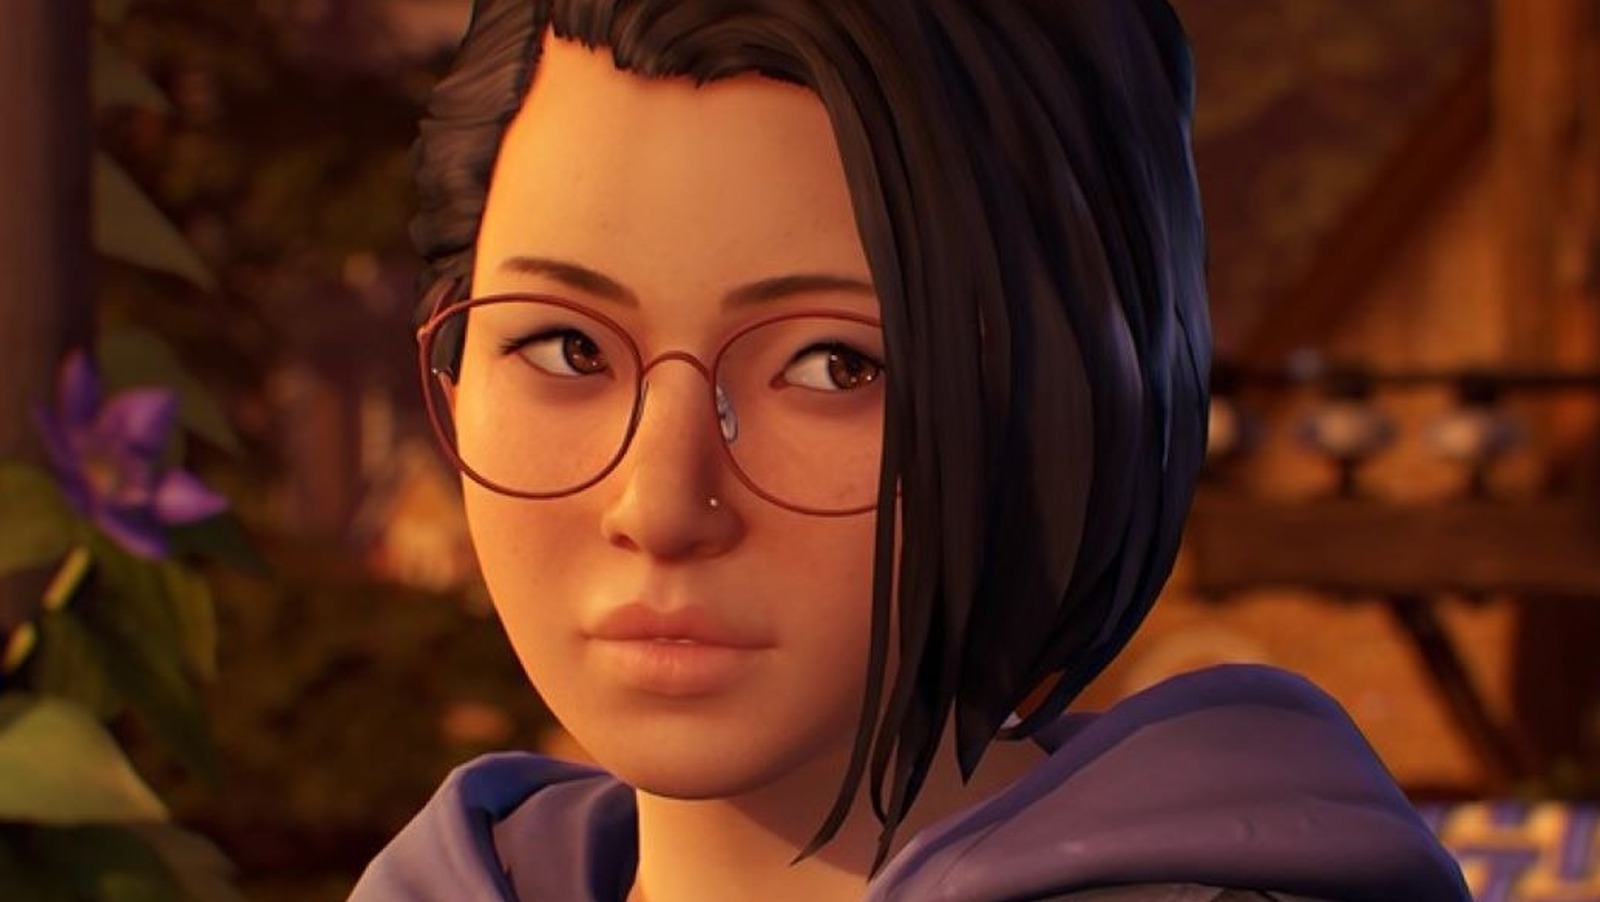 Roundup: Here's What The Critics Are Saying About Life Is Strange